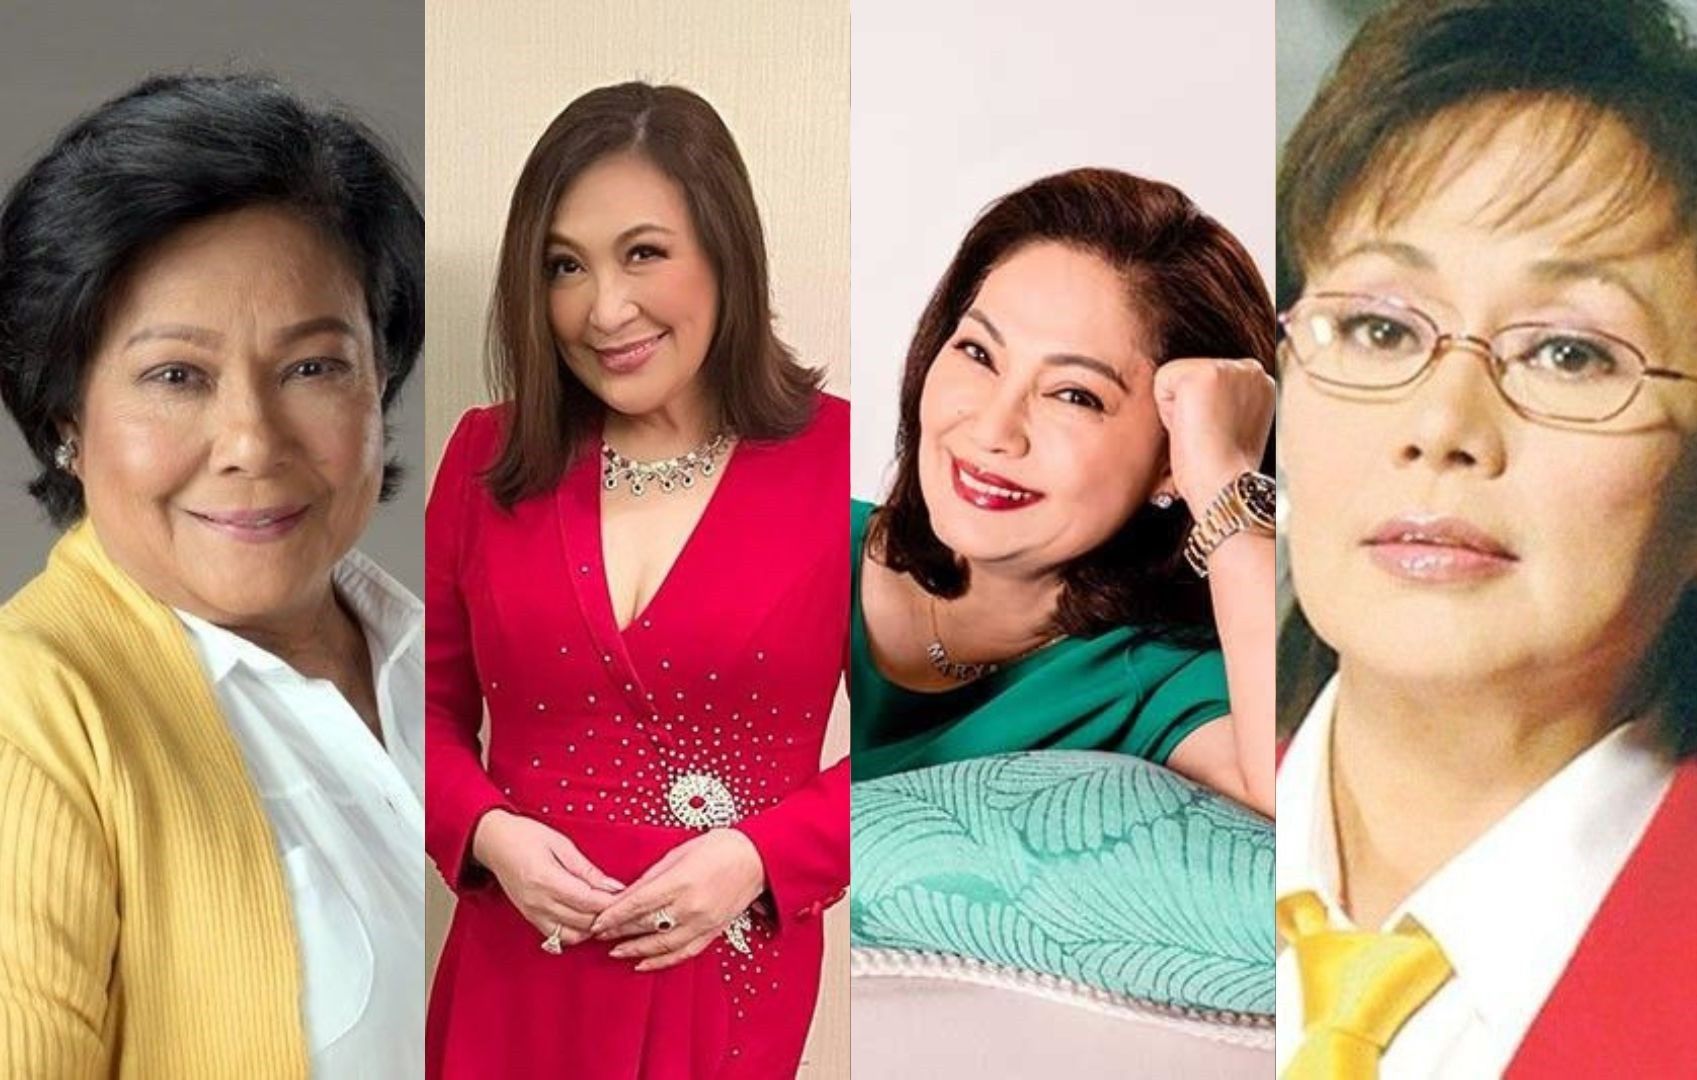 Star wars: Nora Aunor, Sharon Cuneta, Maricel Soriano, Vilma Santos up for PMPC Movie Actress of the Year